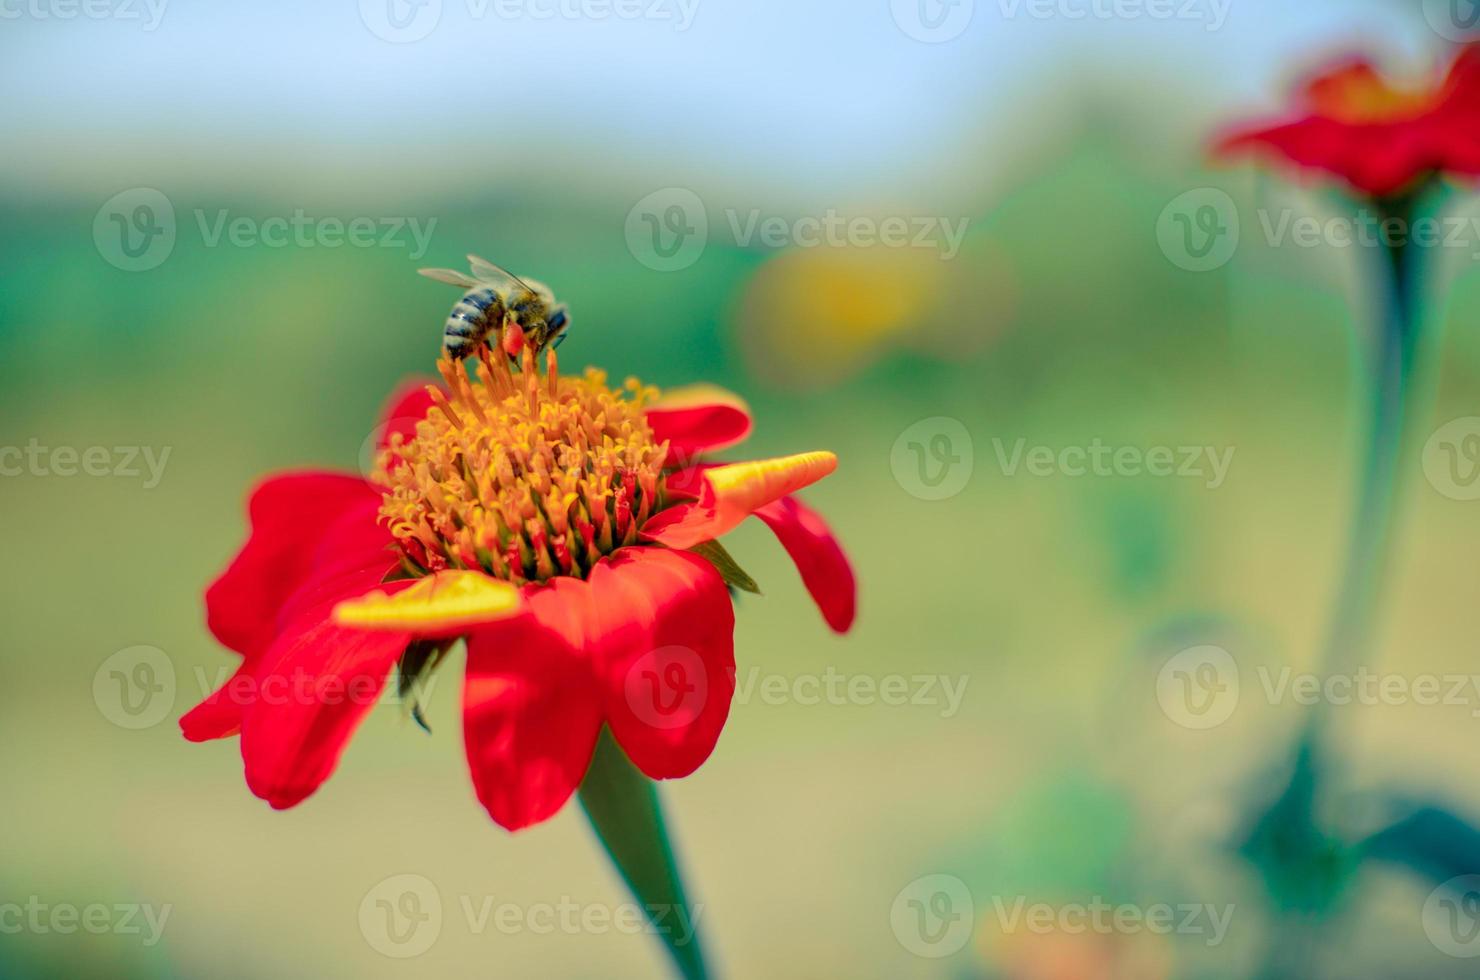 Humblee-bee sitting on a red Dahlia flower photo